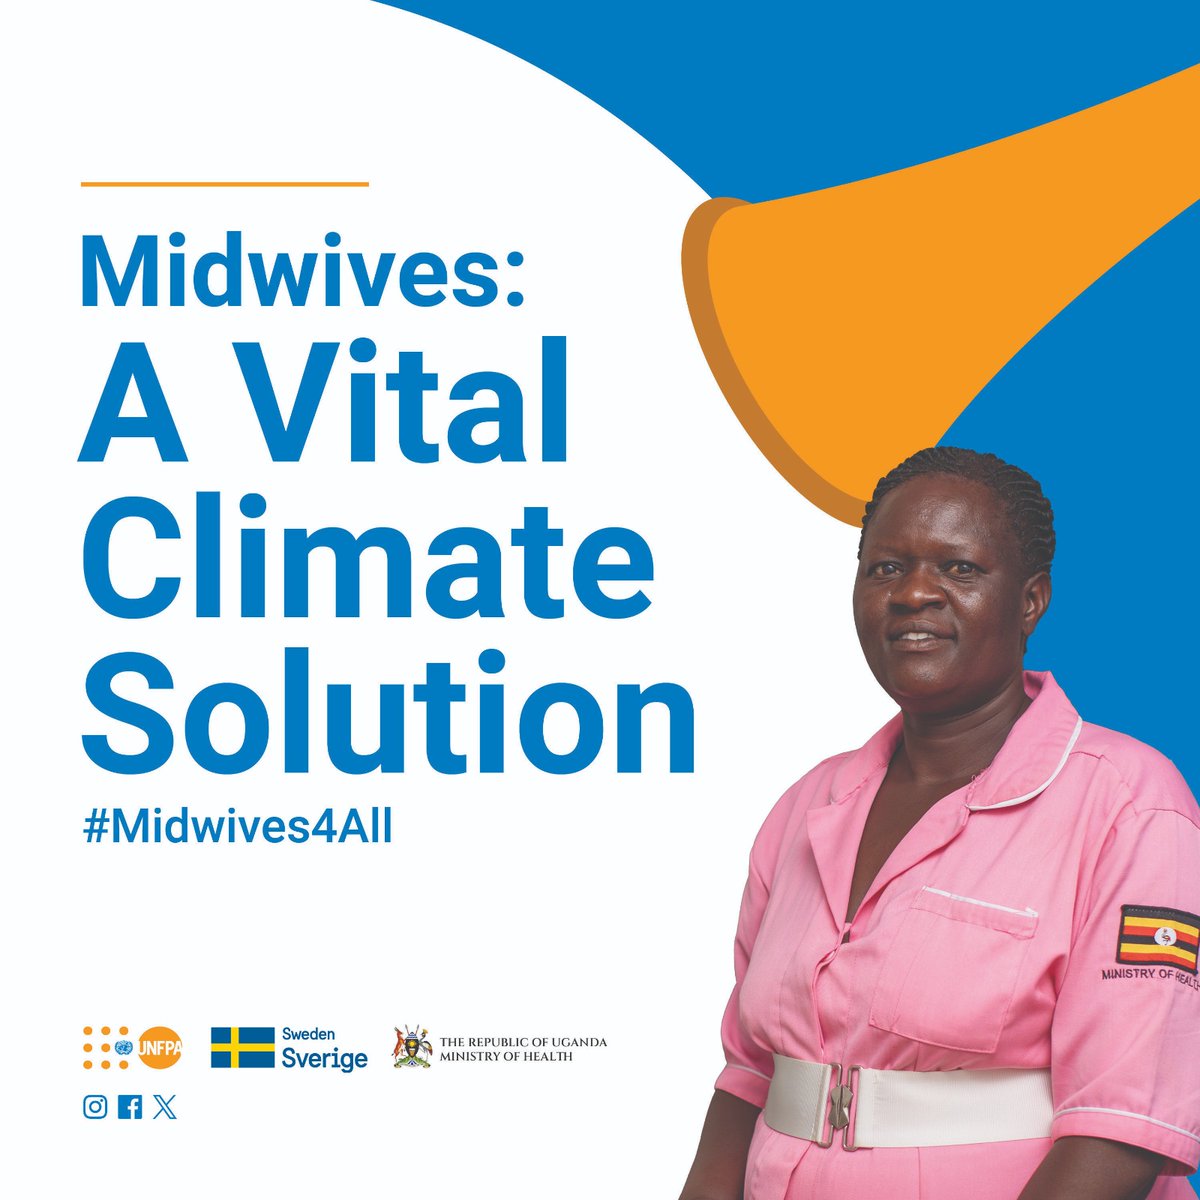 A day like this serves to recognize their invaluable contributions& work towards empowering more midwives. @UNFPAUganda and partners are working towards bridging the gap. Increasing midwifery coverage by 25% could save 2.2 million lives annually by 2035. #Midwives4All #IDM2024